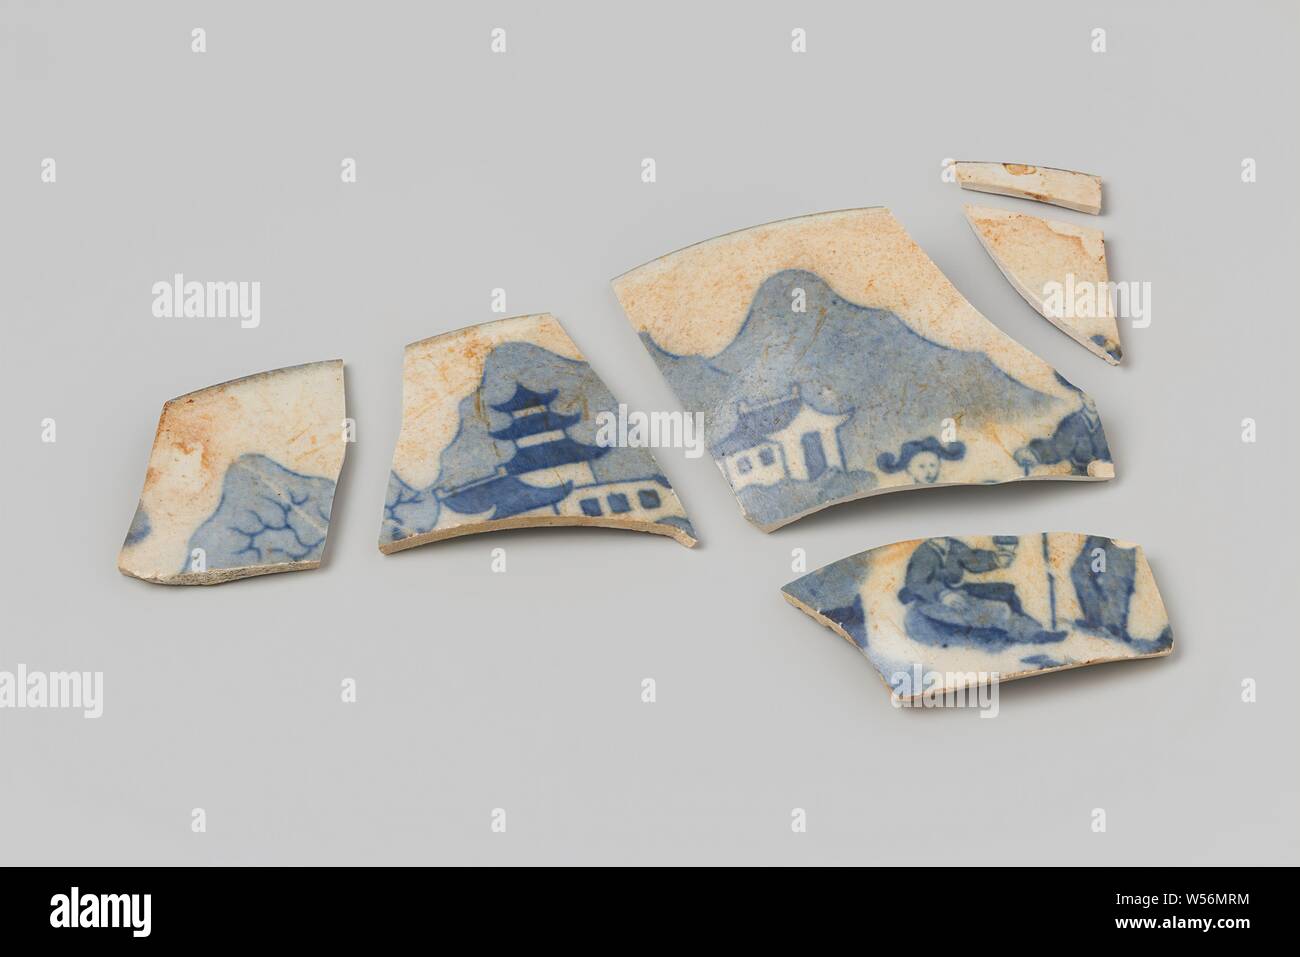 Shards of a dish from the wreck of the East Indies ship 't Vliegend Hart, Six shards of a porcelain dish. Delft blue with drawing on both sides. Bowl, Dutch East India Company, 't Vliegend Hart (ship), Netherlands, 1700 - 2-Mar-1735, porcelain (material), h 1.8 cm × w 7.9 cm × d 5.3 cm × h 0.3 cm × w 2.2 cm × d 0.6 cm Stock Photo